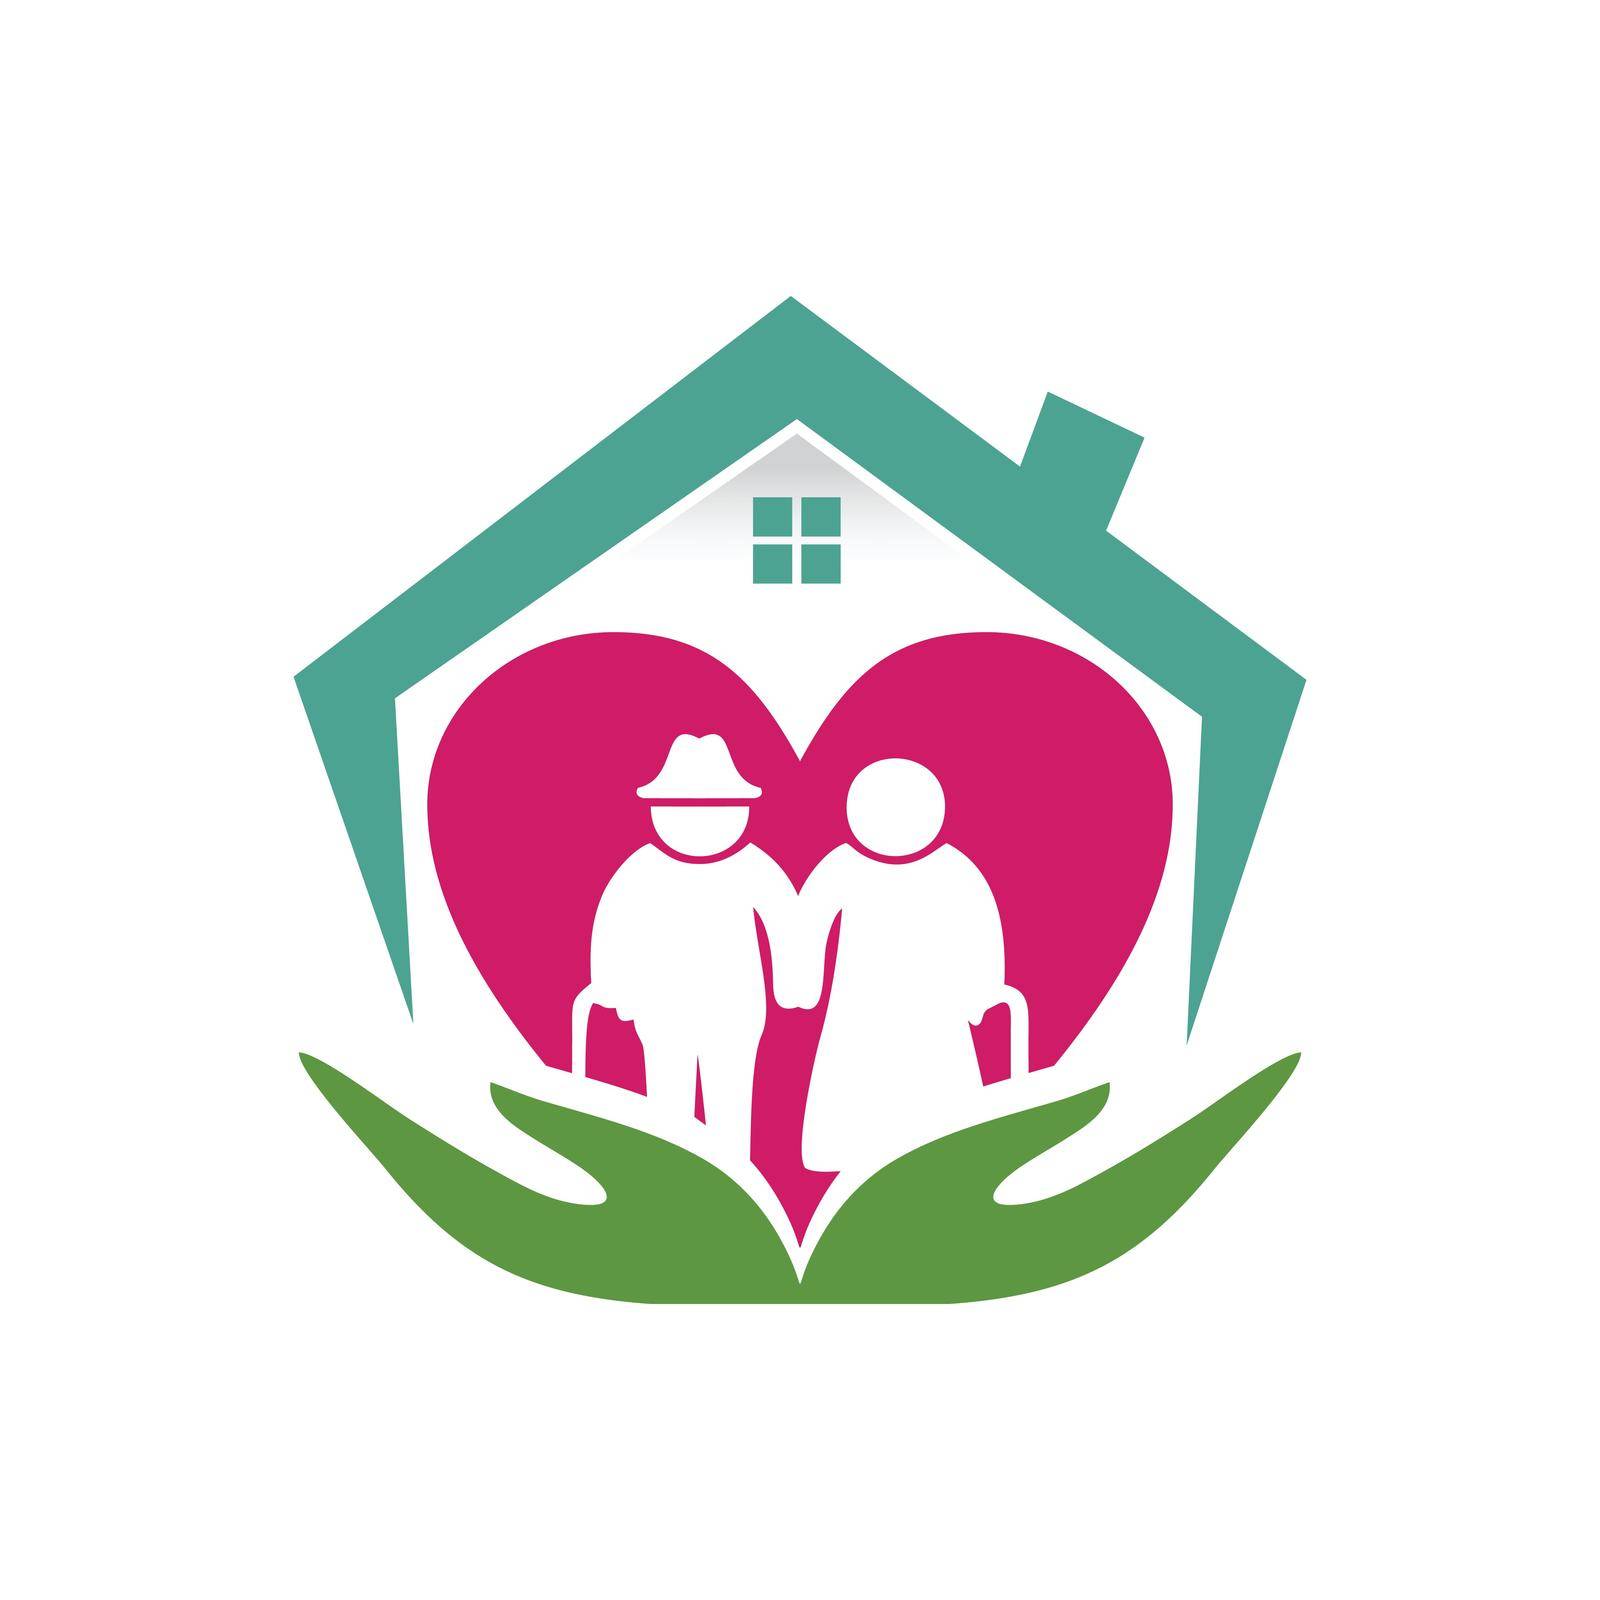 home care love clean logo by Up2date